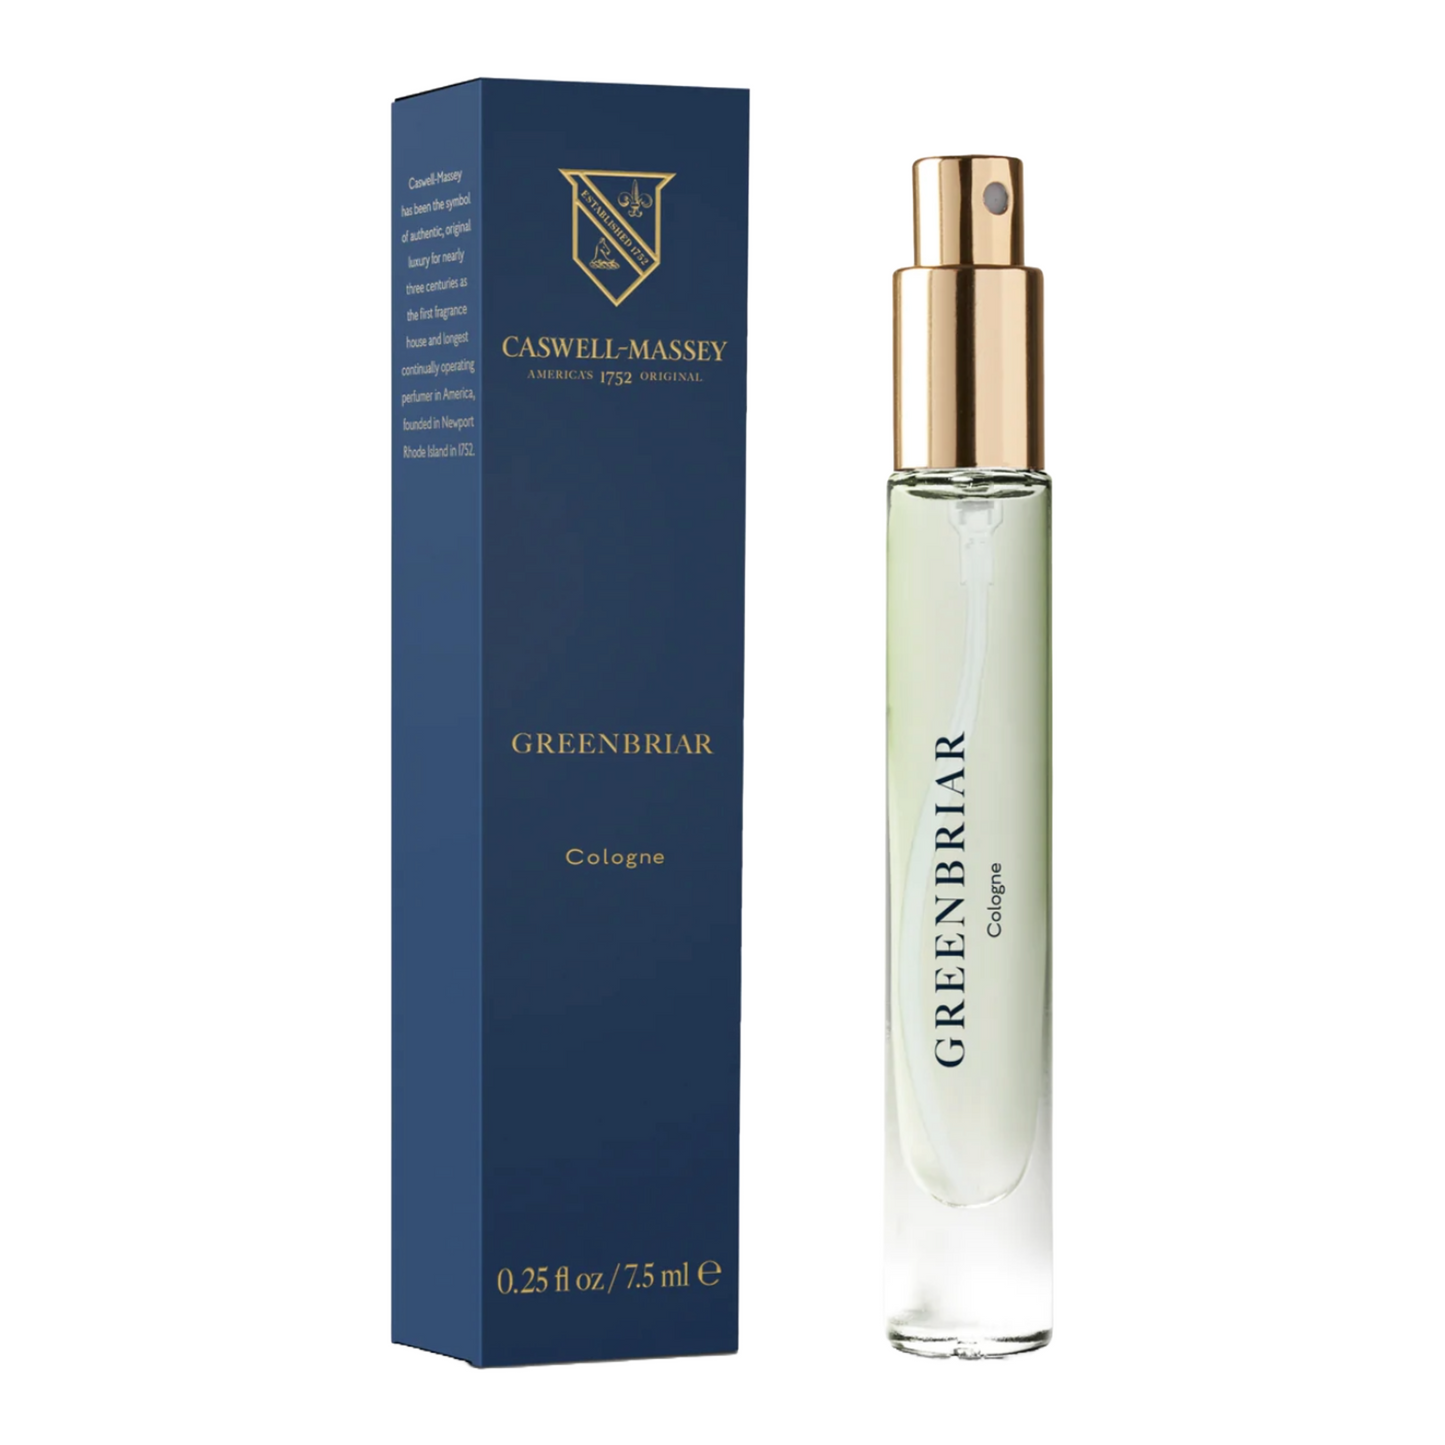 Greenbriar Cologne Fragrance Vial by Caswell-Massey